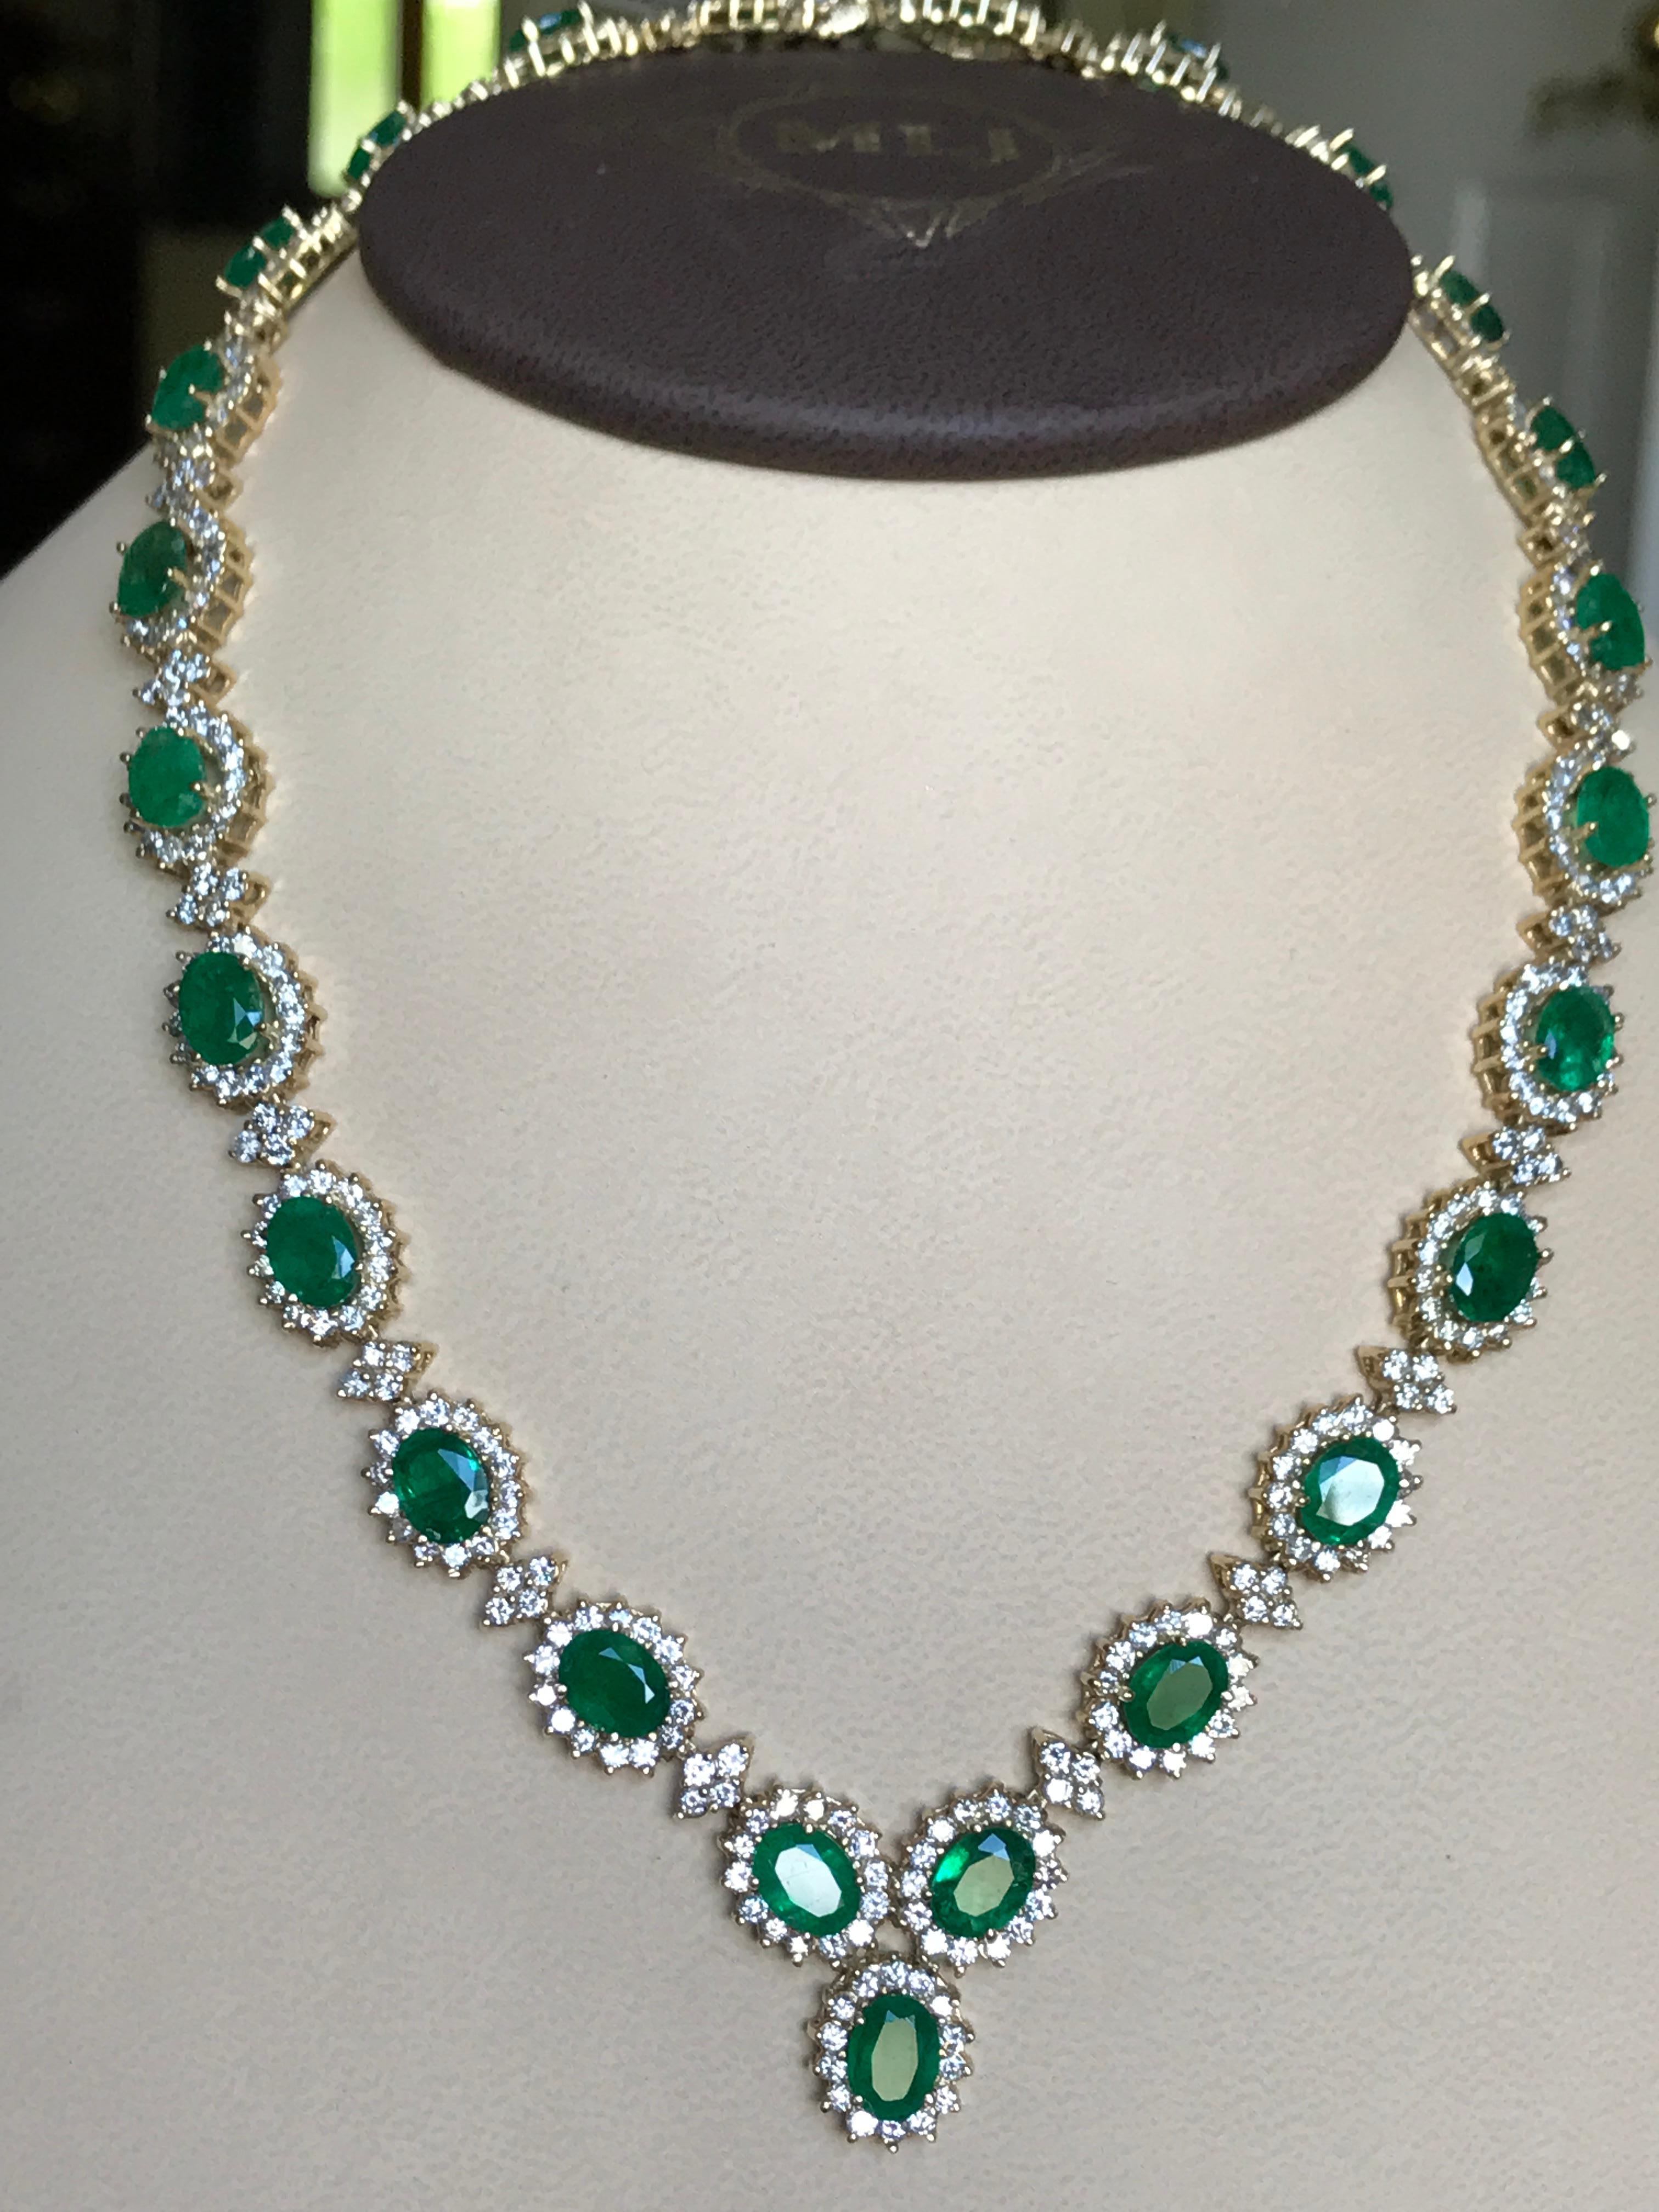 37 Ct Oval Shape Natural  Emerald & 22 Carat Diamond Necklace & Earring  Suite For Sale 5